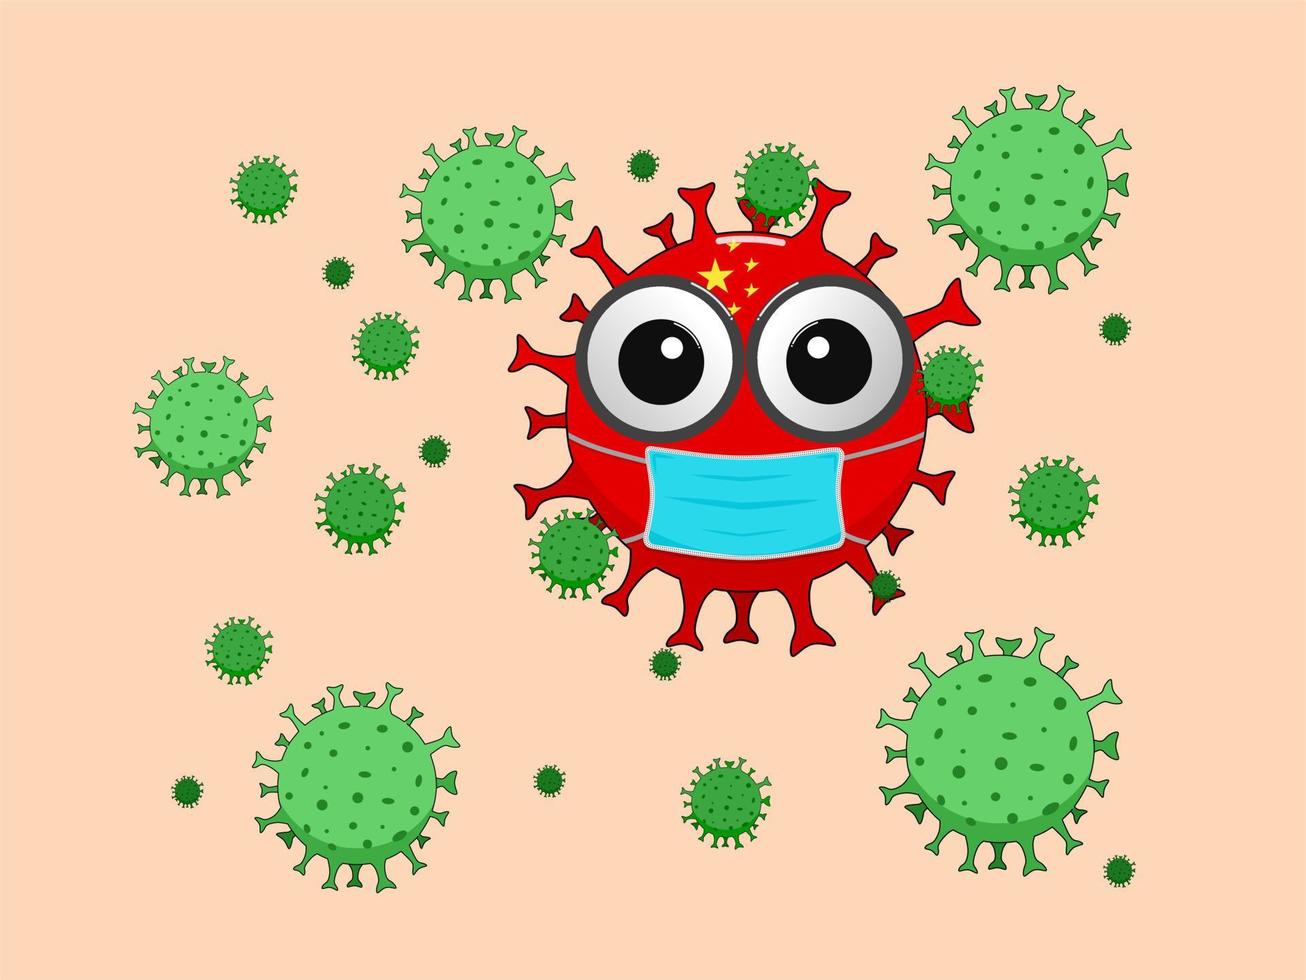 Corona virus illustration, a bacterial character on the background of the Chinese flag wearing a mask, being surrounded by corona virus bacteria vector